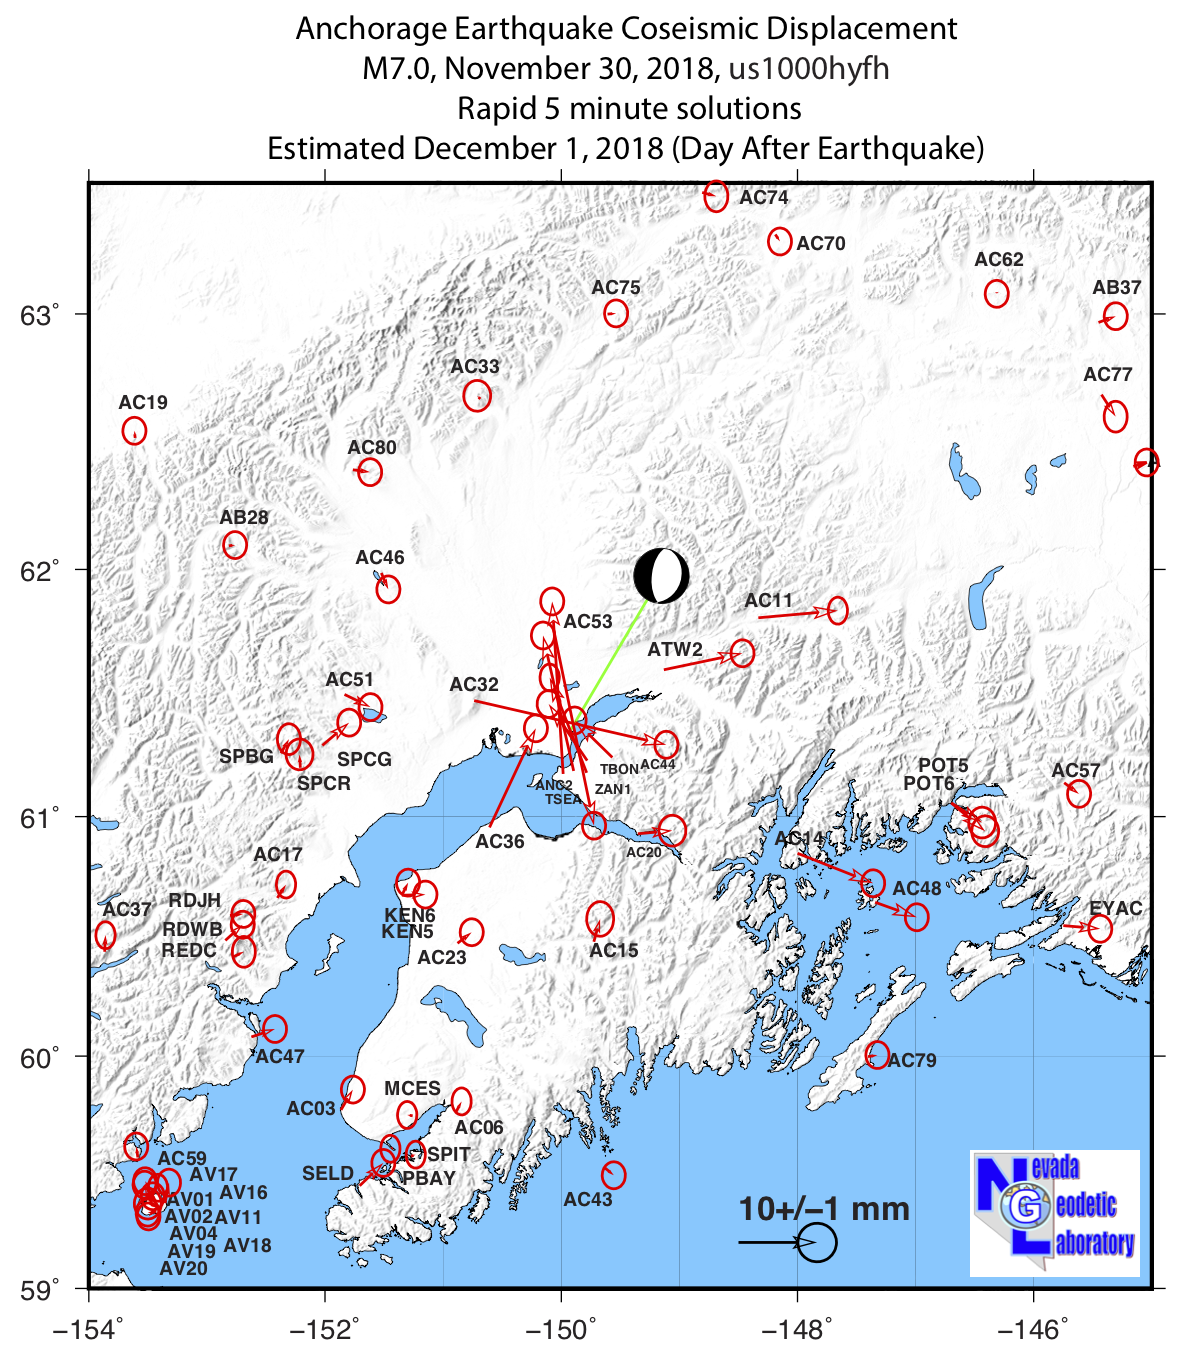 Map of coseismic displacement from the Anchorage M7.0 earthquake